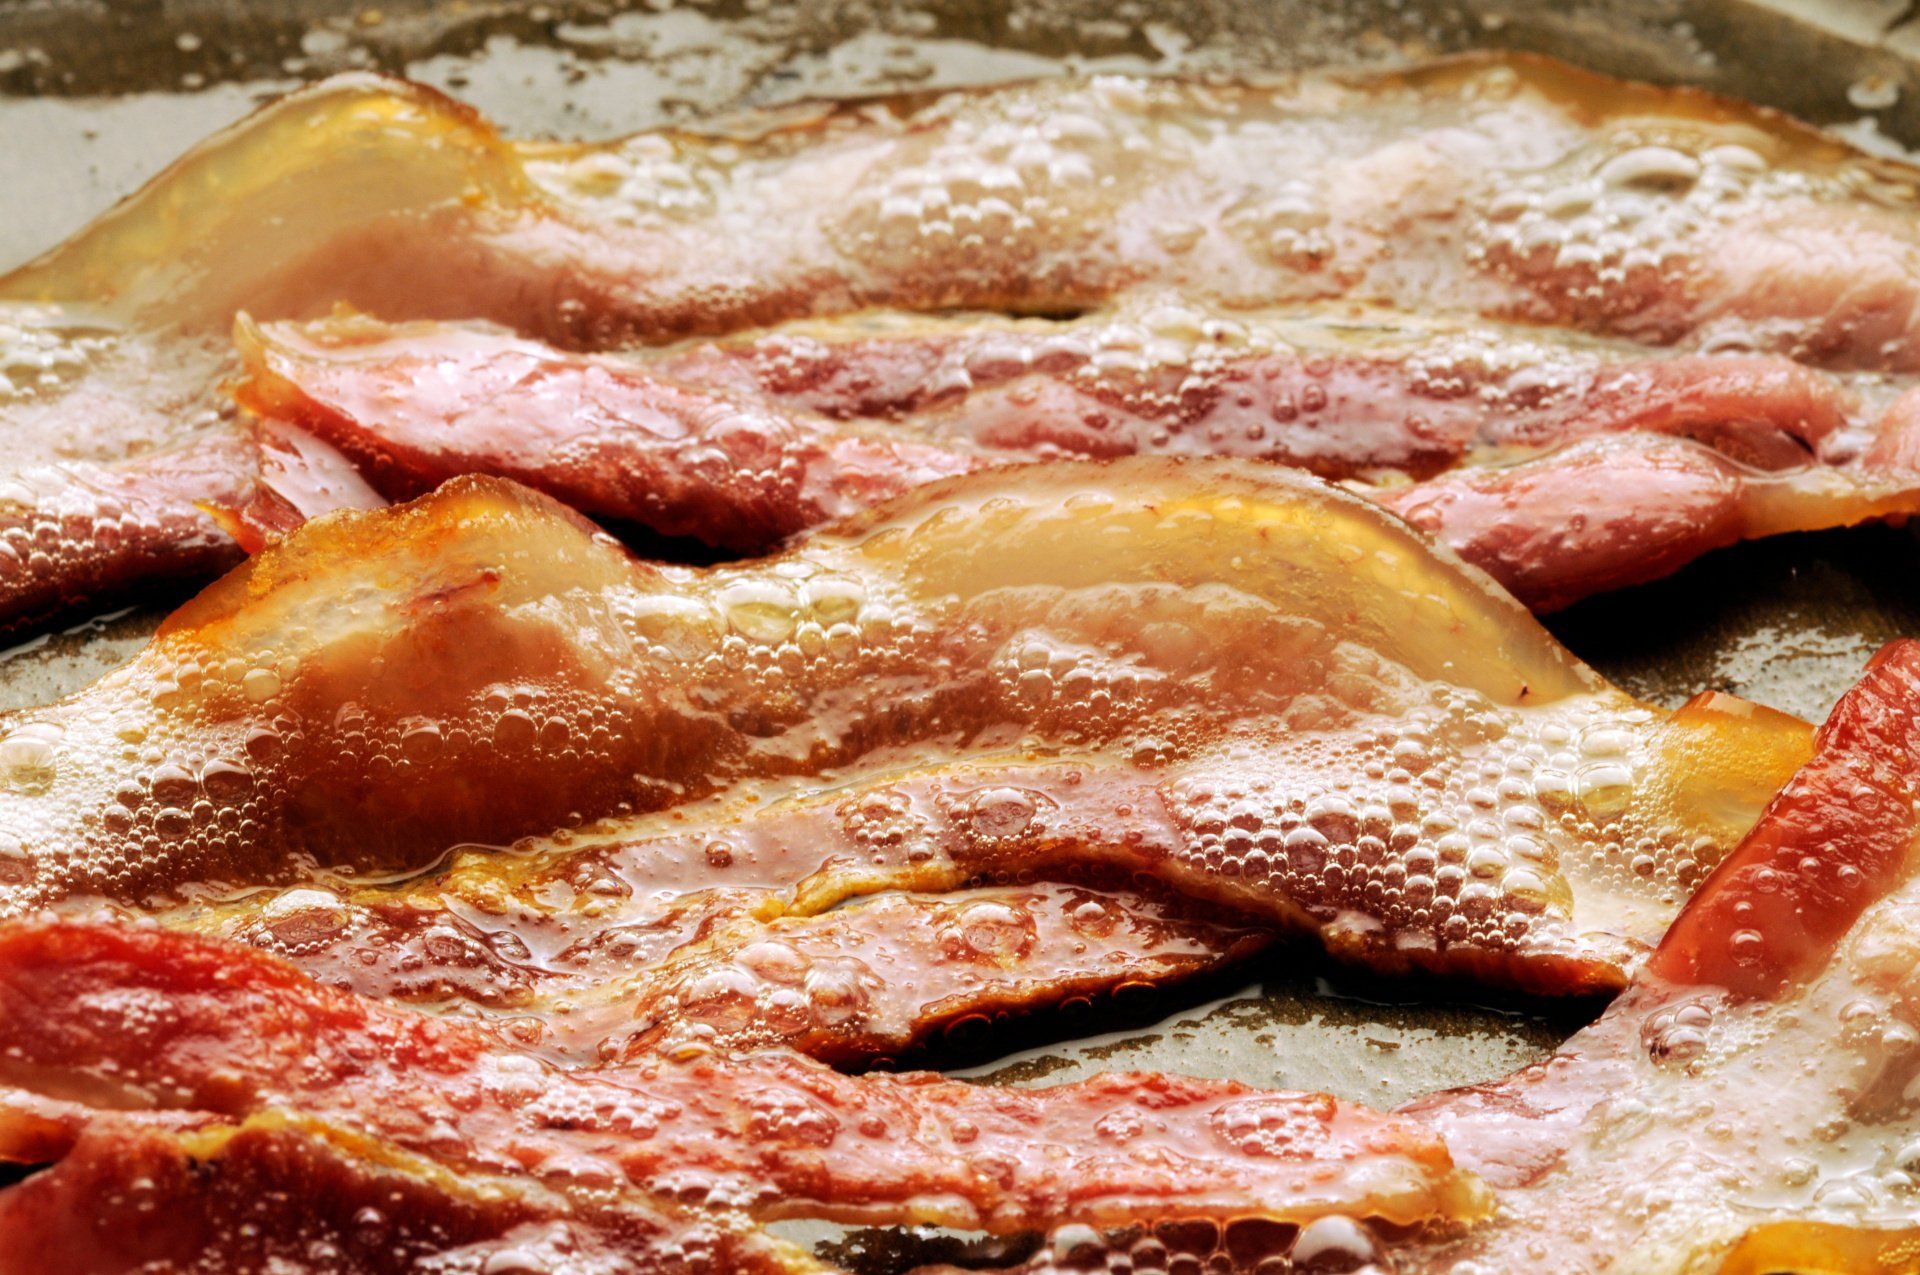 https://lirp.cdn-website.com/818538c1/dms3rep/multi/opt/bacon+and+bacon+grease-1920w.jpeg